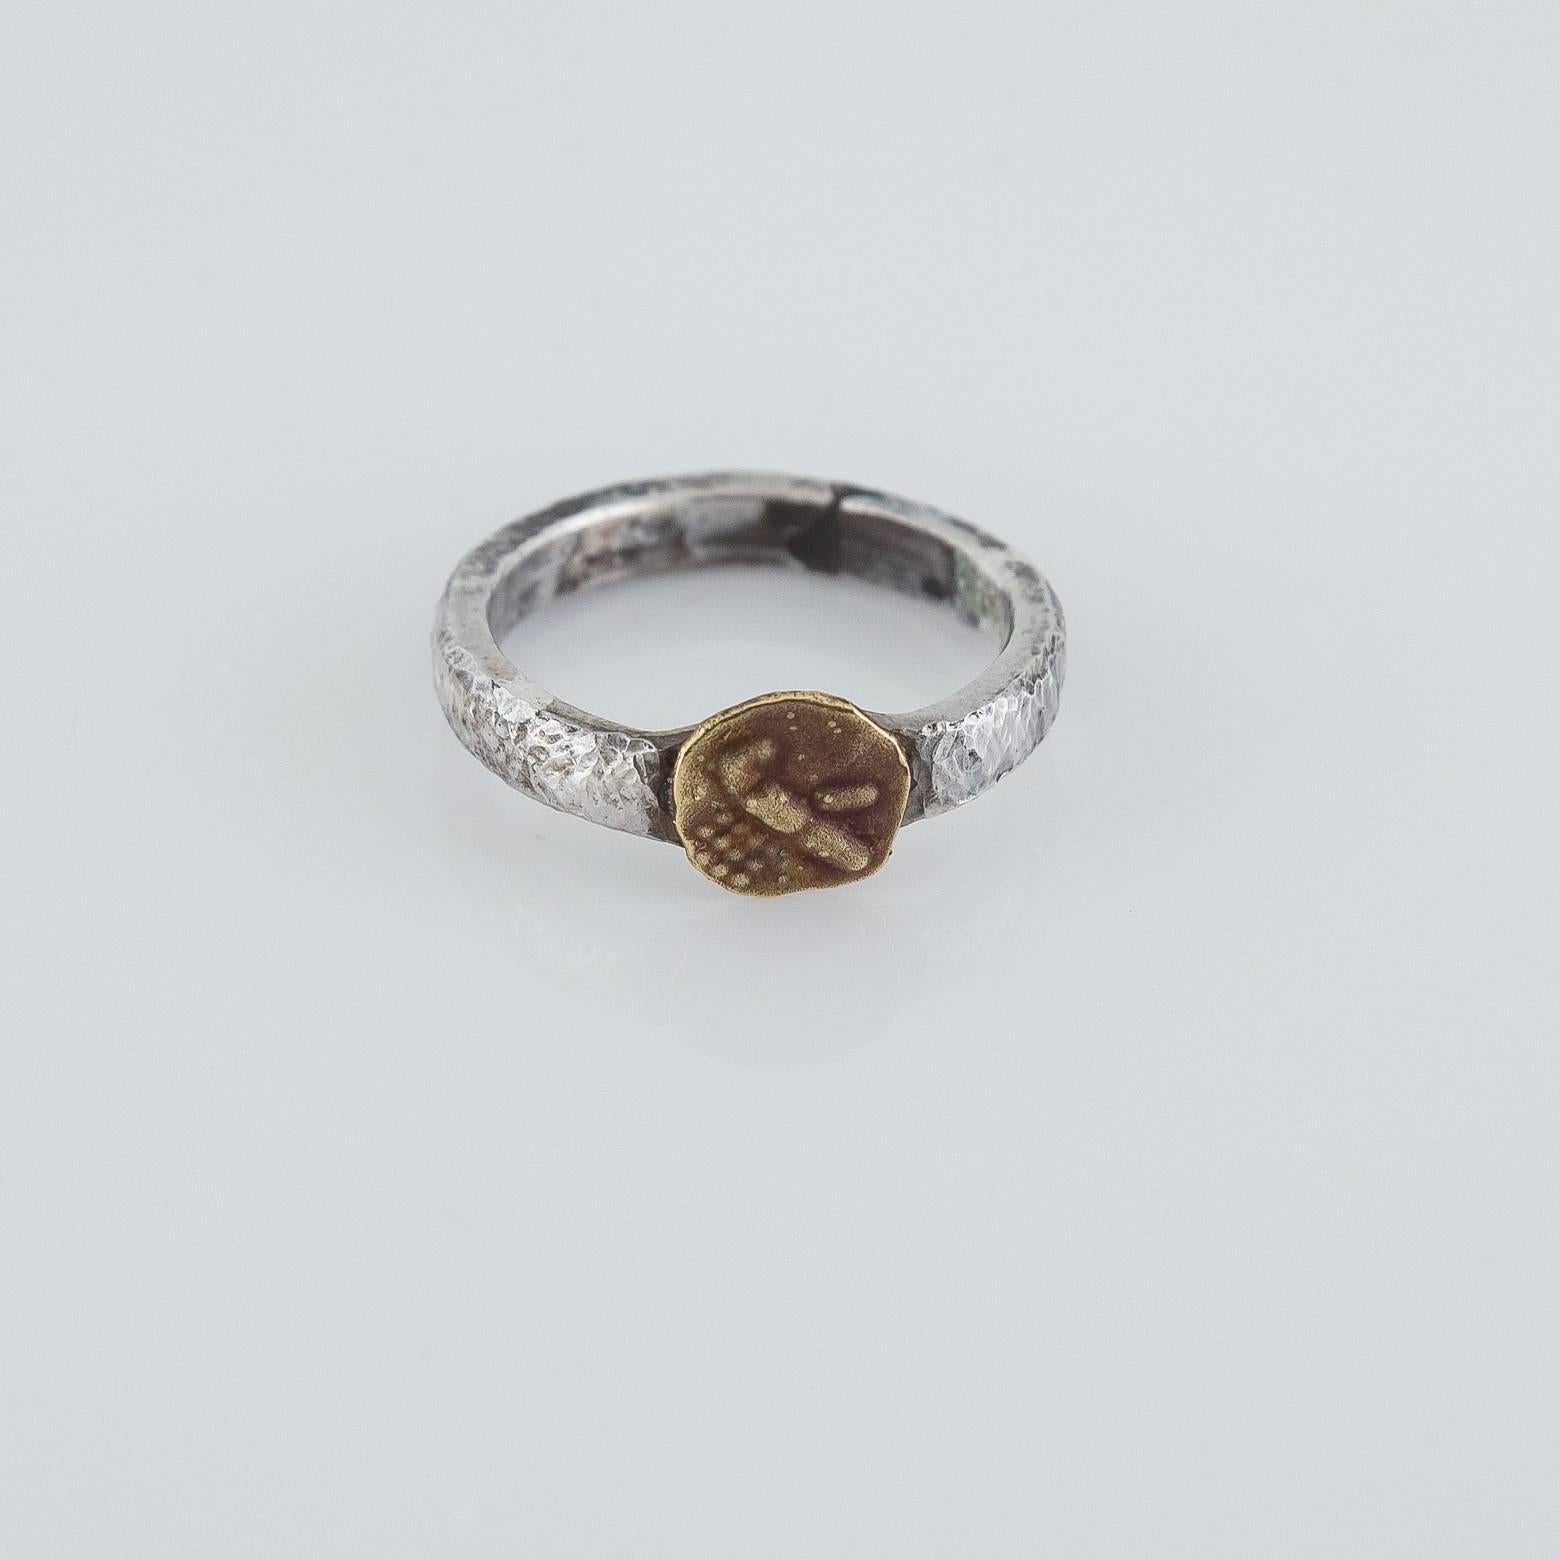 Handmade in our San Francisco Bay Area Studio this sterling silver band is hammered to create a unique almost woven texture with a stamped 14k yellow gold coin to sit on top. Fit for either sex and is a great stacking ring for added flare. This ring